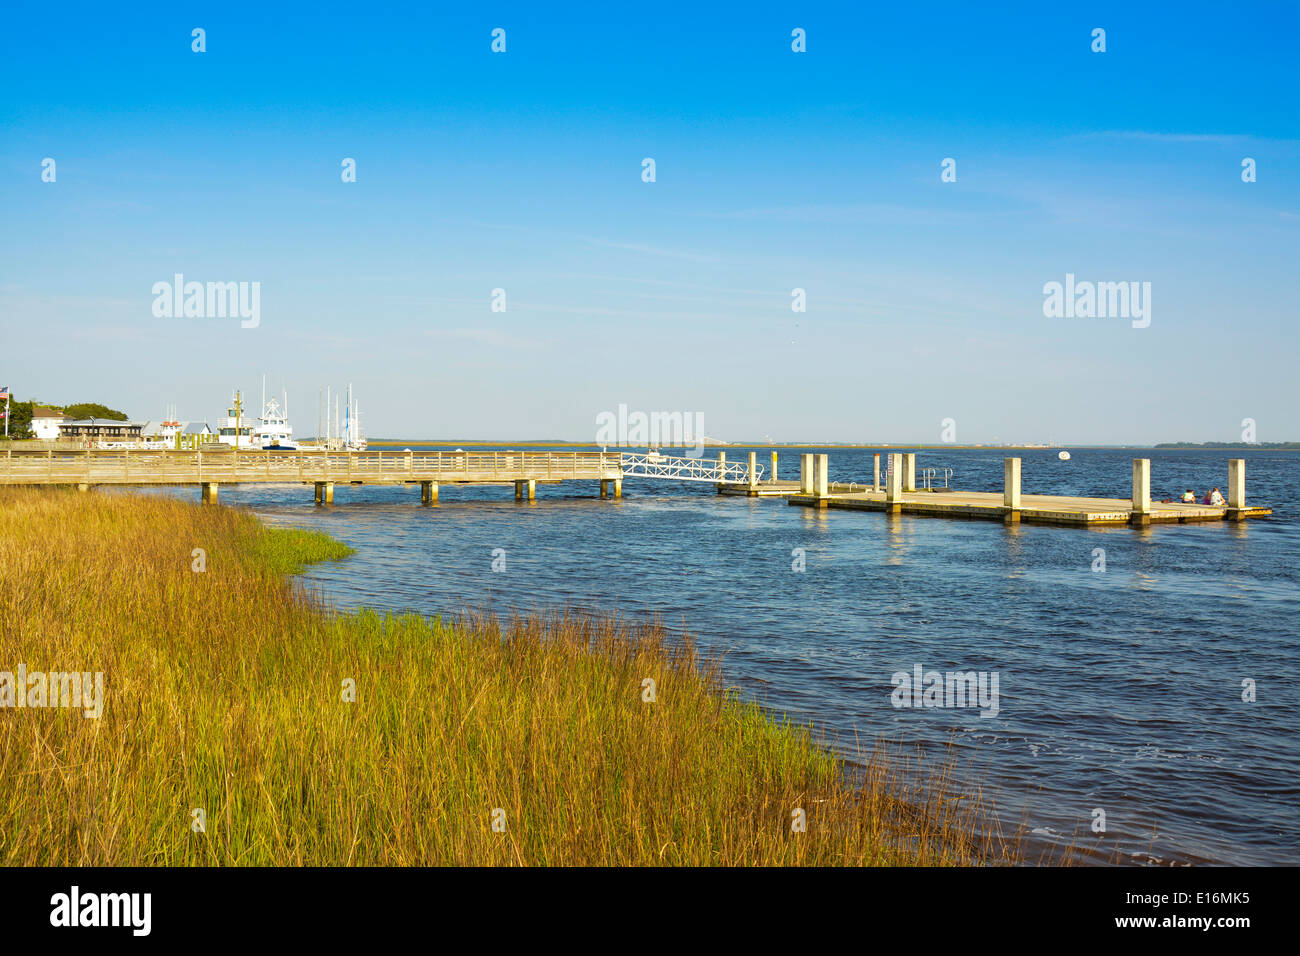 Lowcountry marsh plants frame the wooden piers at the waterfront at St Mary's, GA, USA Stock Photo